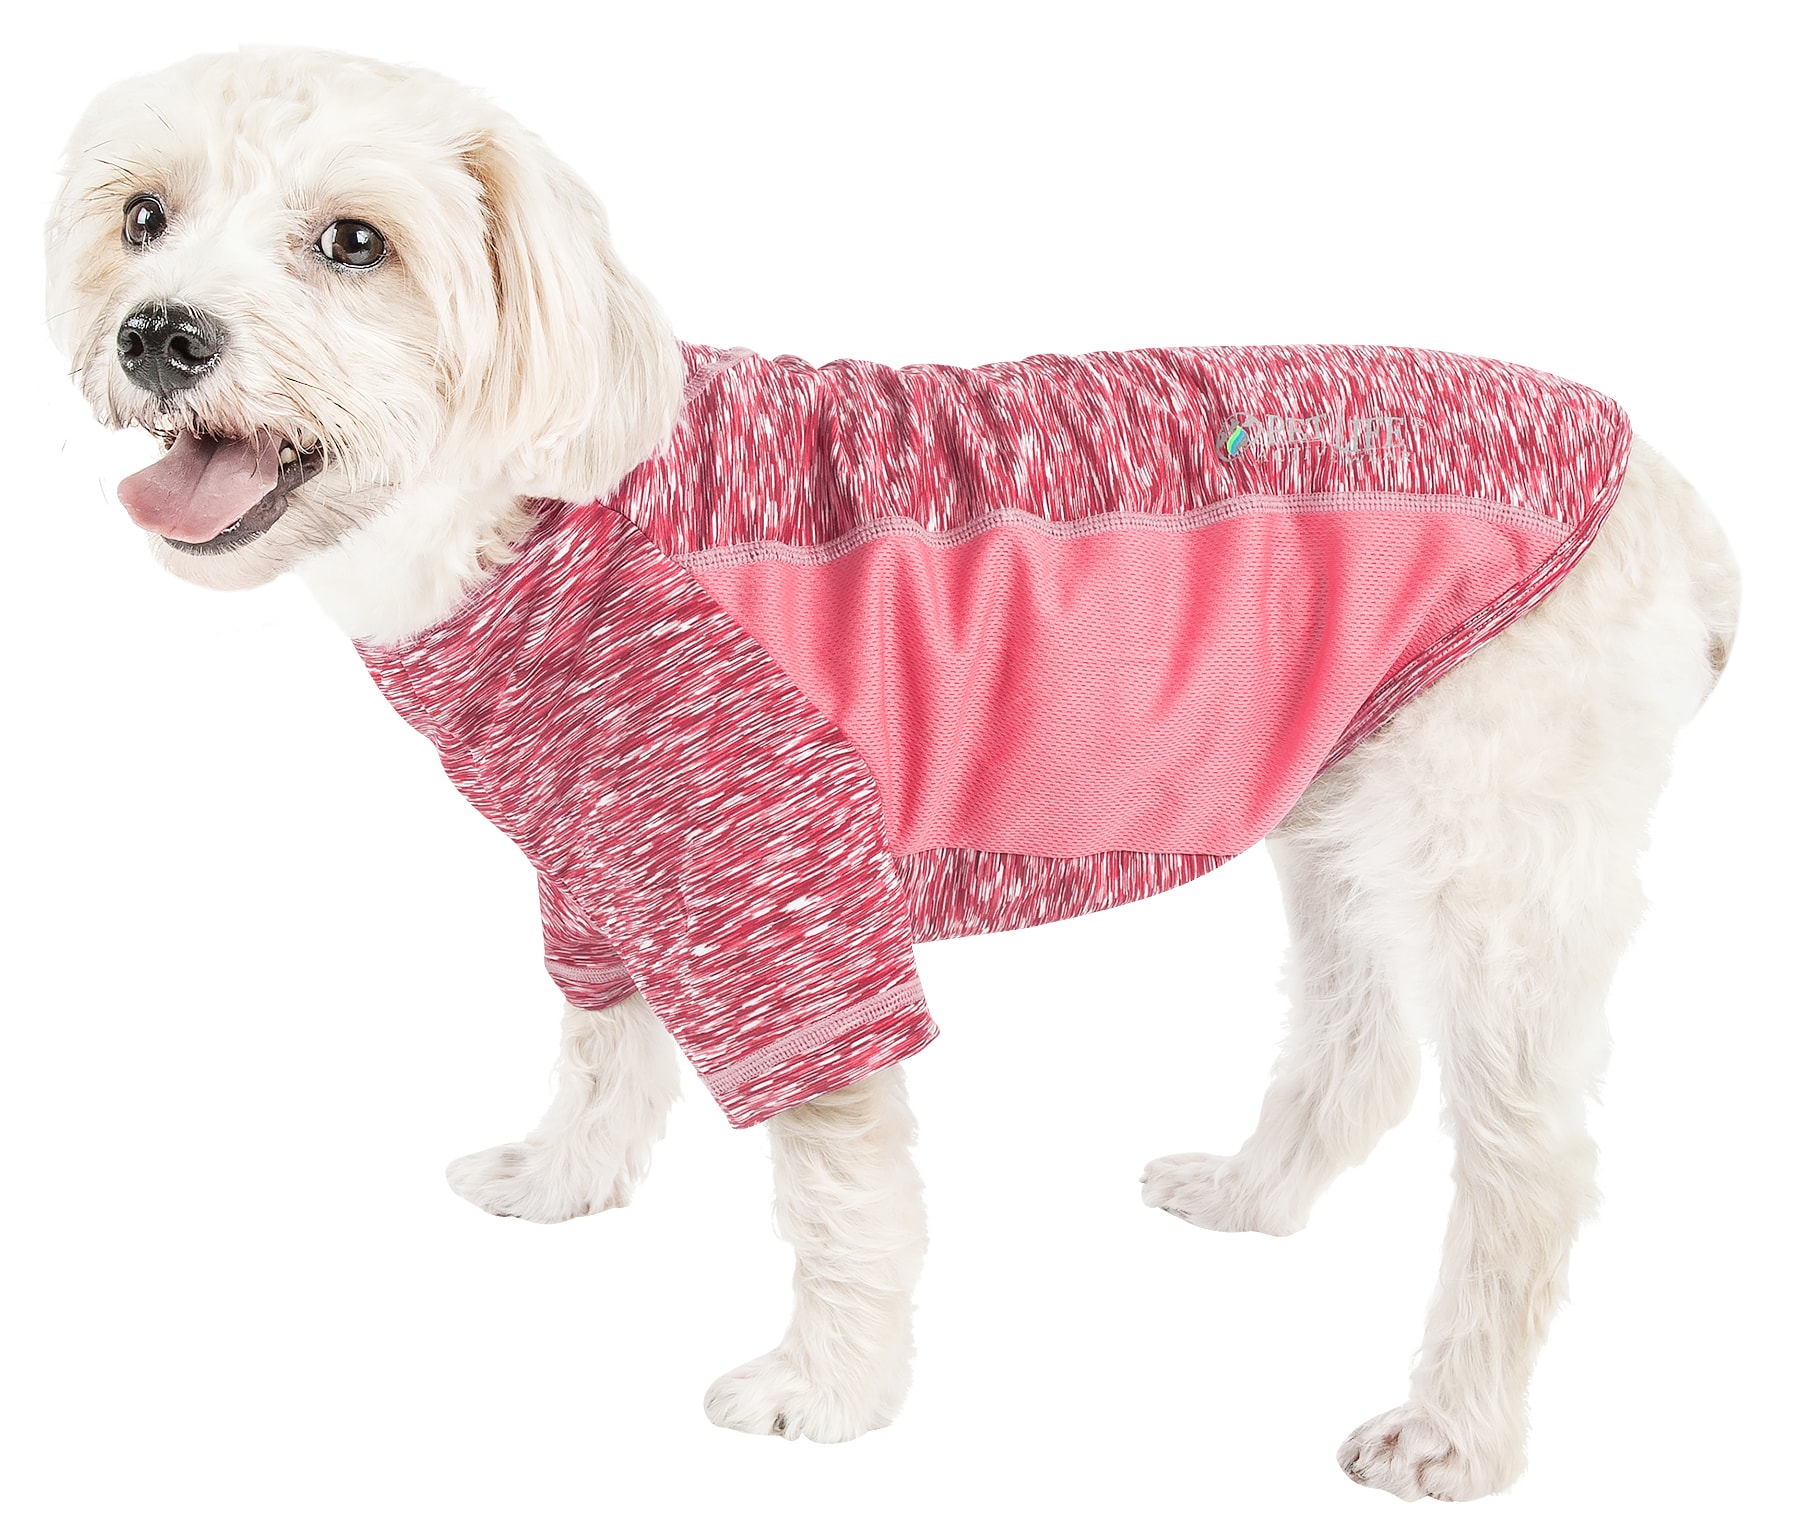 Pet Life Active 'Warf Speed' Heathered Ultra-Stretch Sporty Performance Dog T-Shirt (Blue - X-Small)